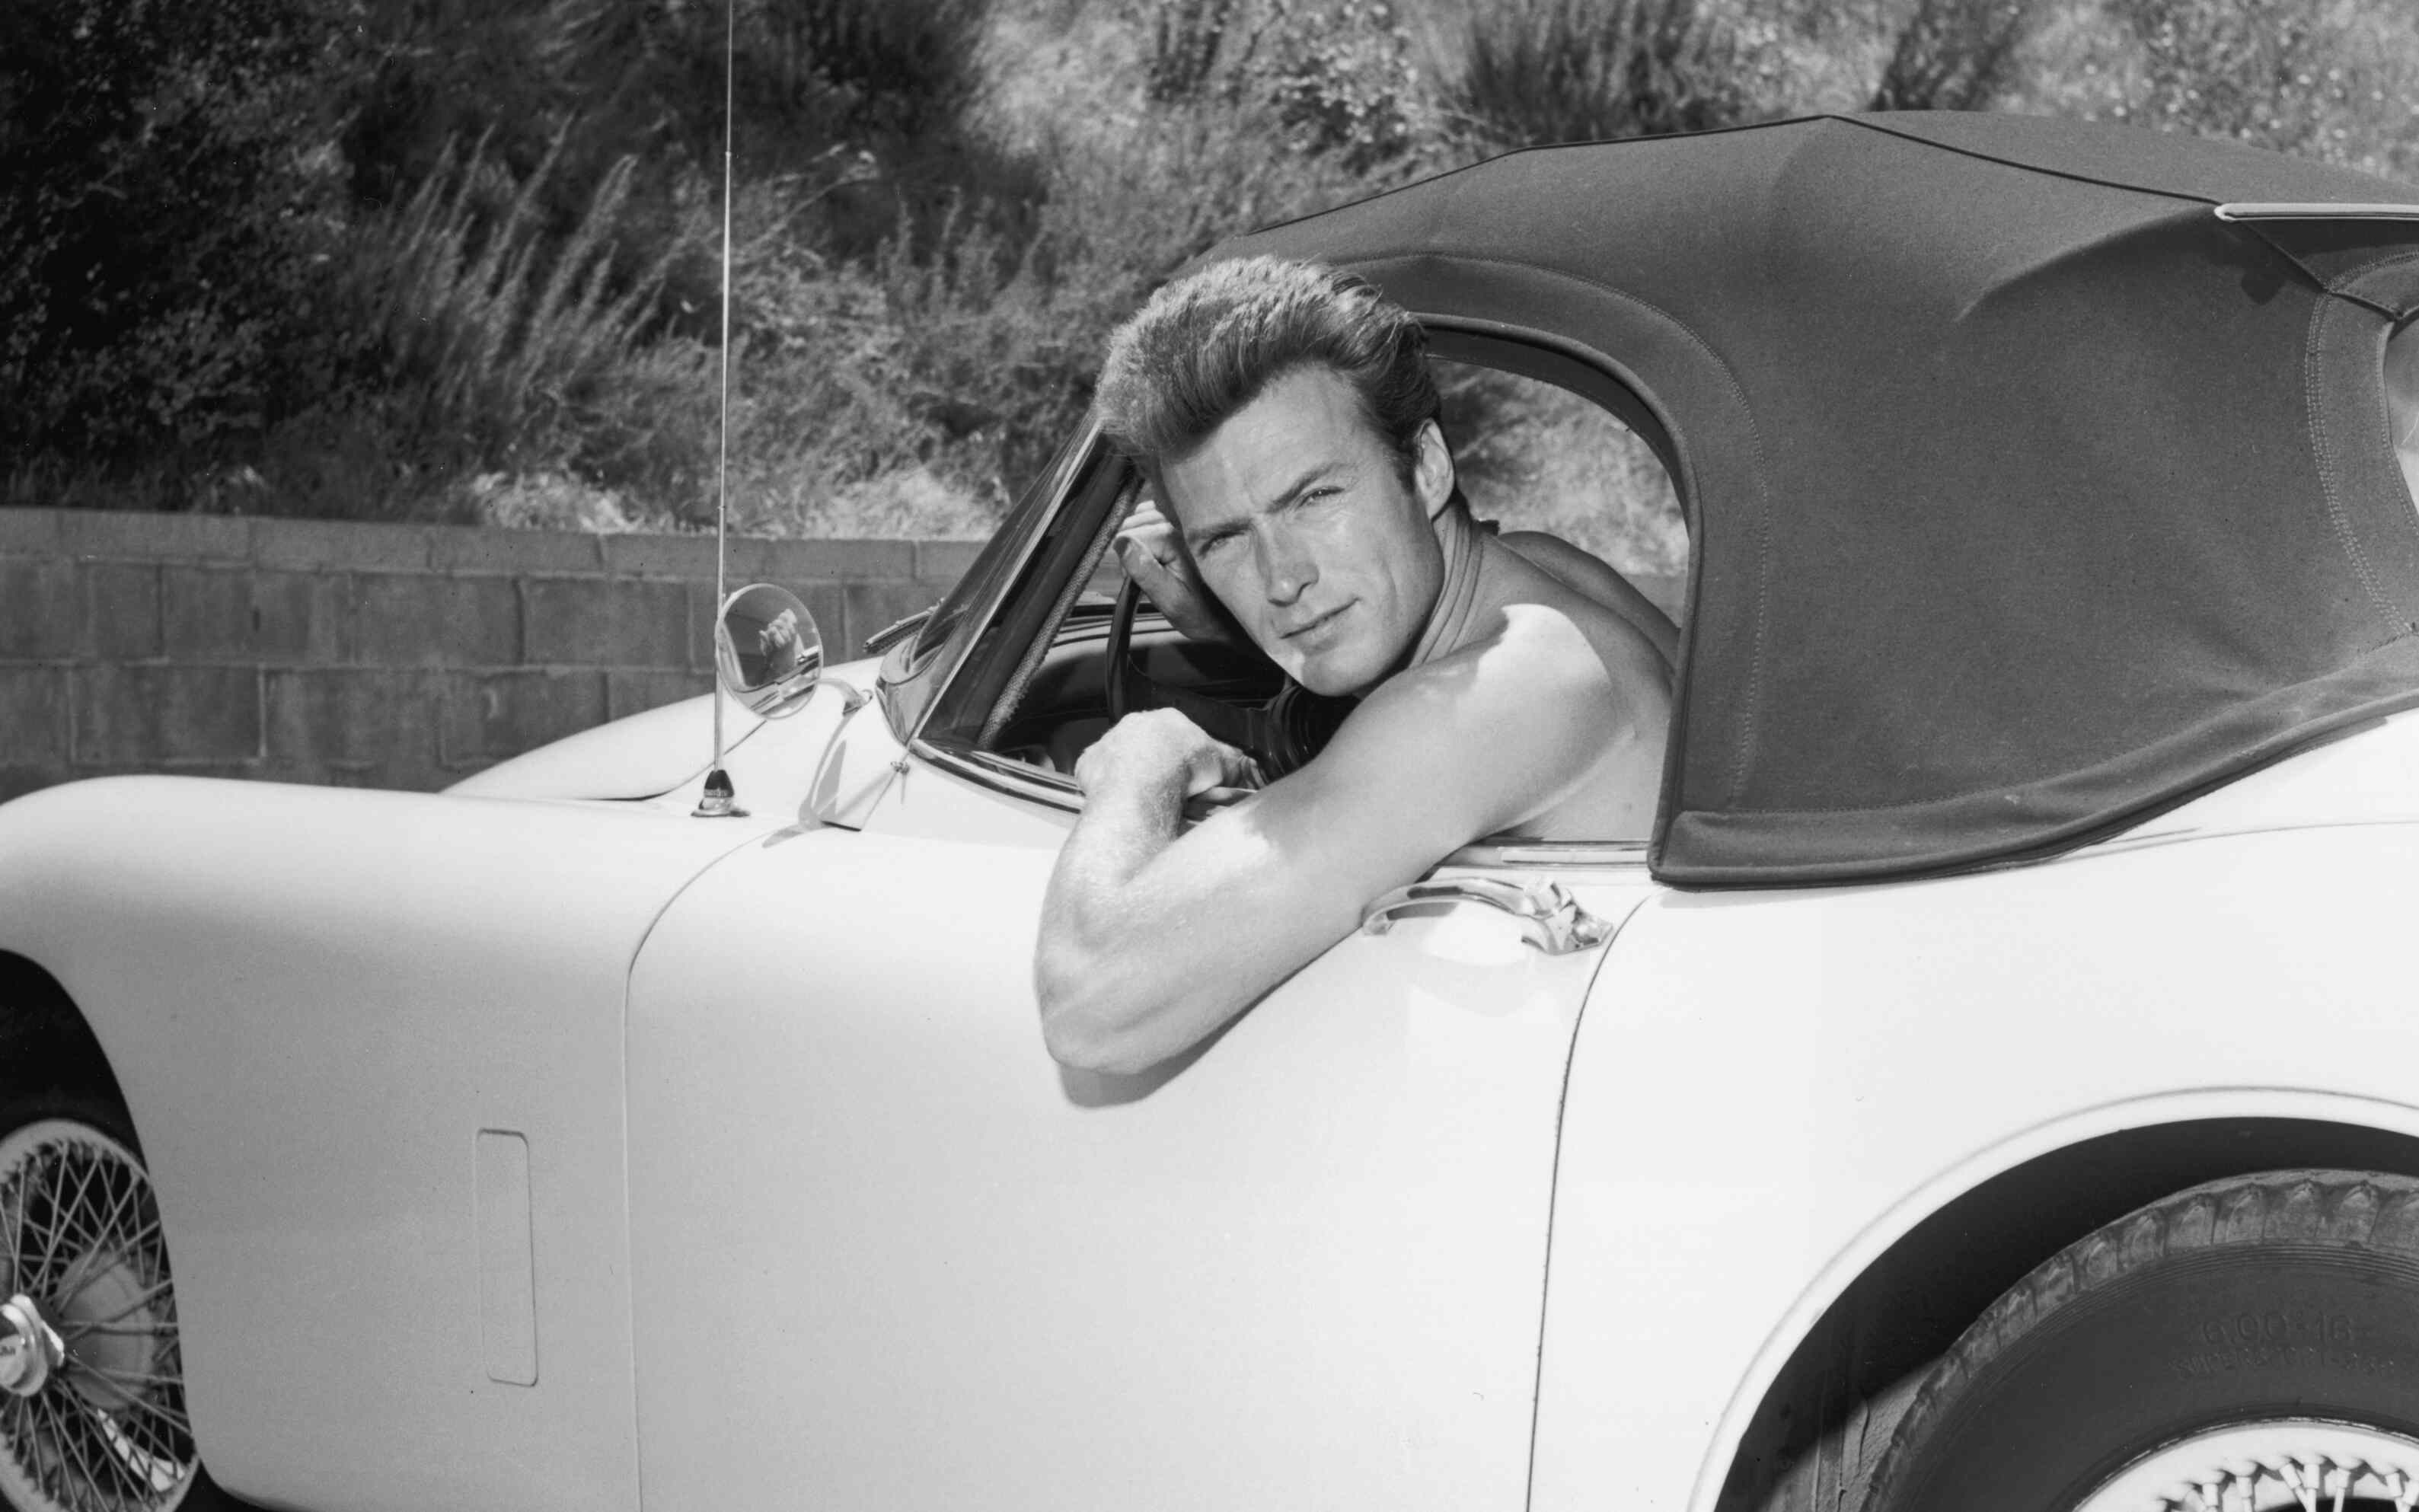 A shirtless Clint Eastwood leans out the window of a Jaguar convertible (ca. 1965)